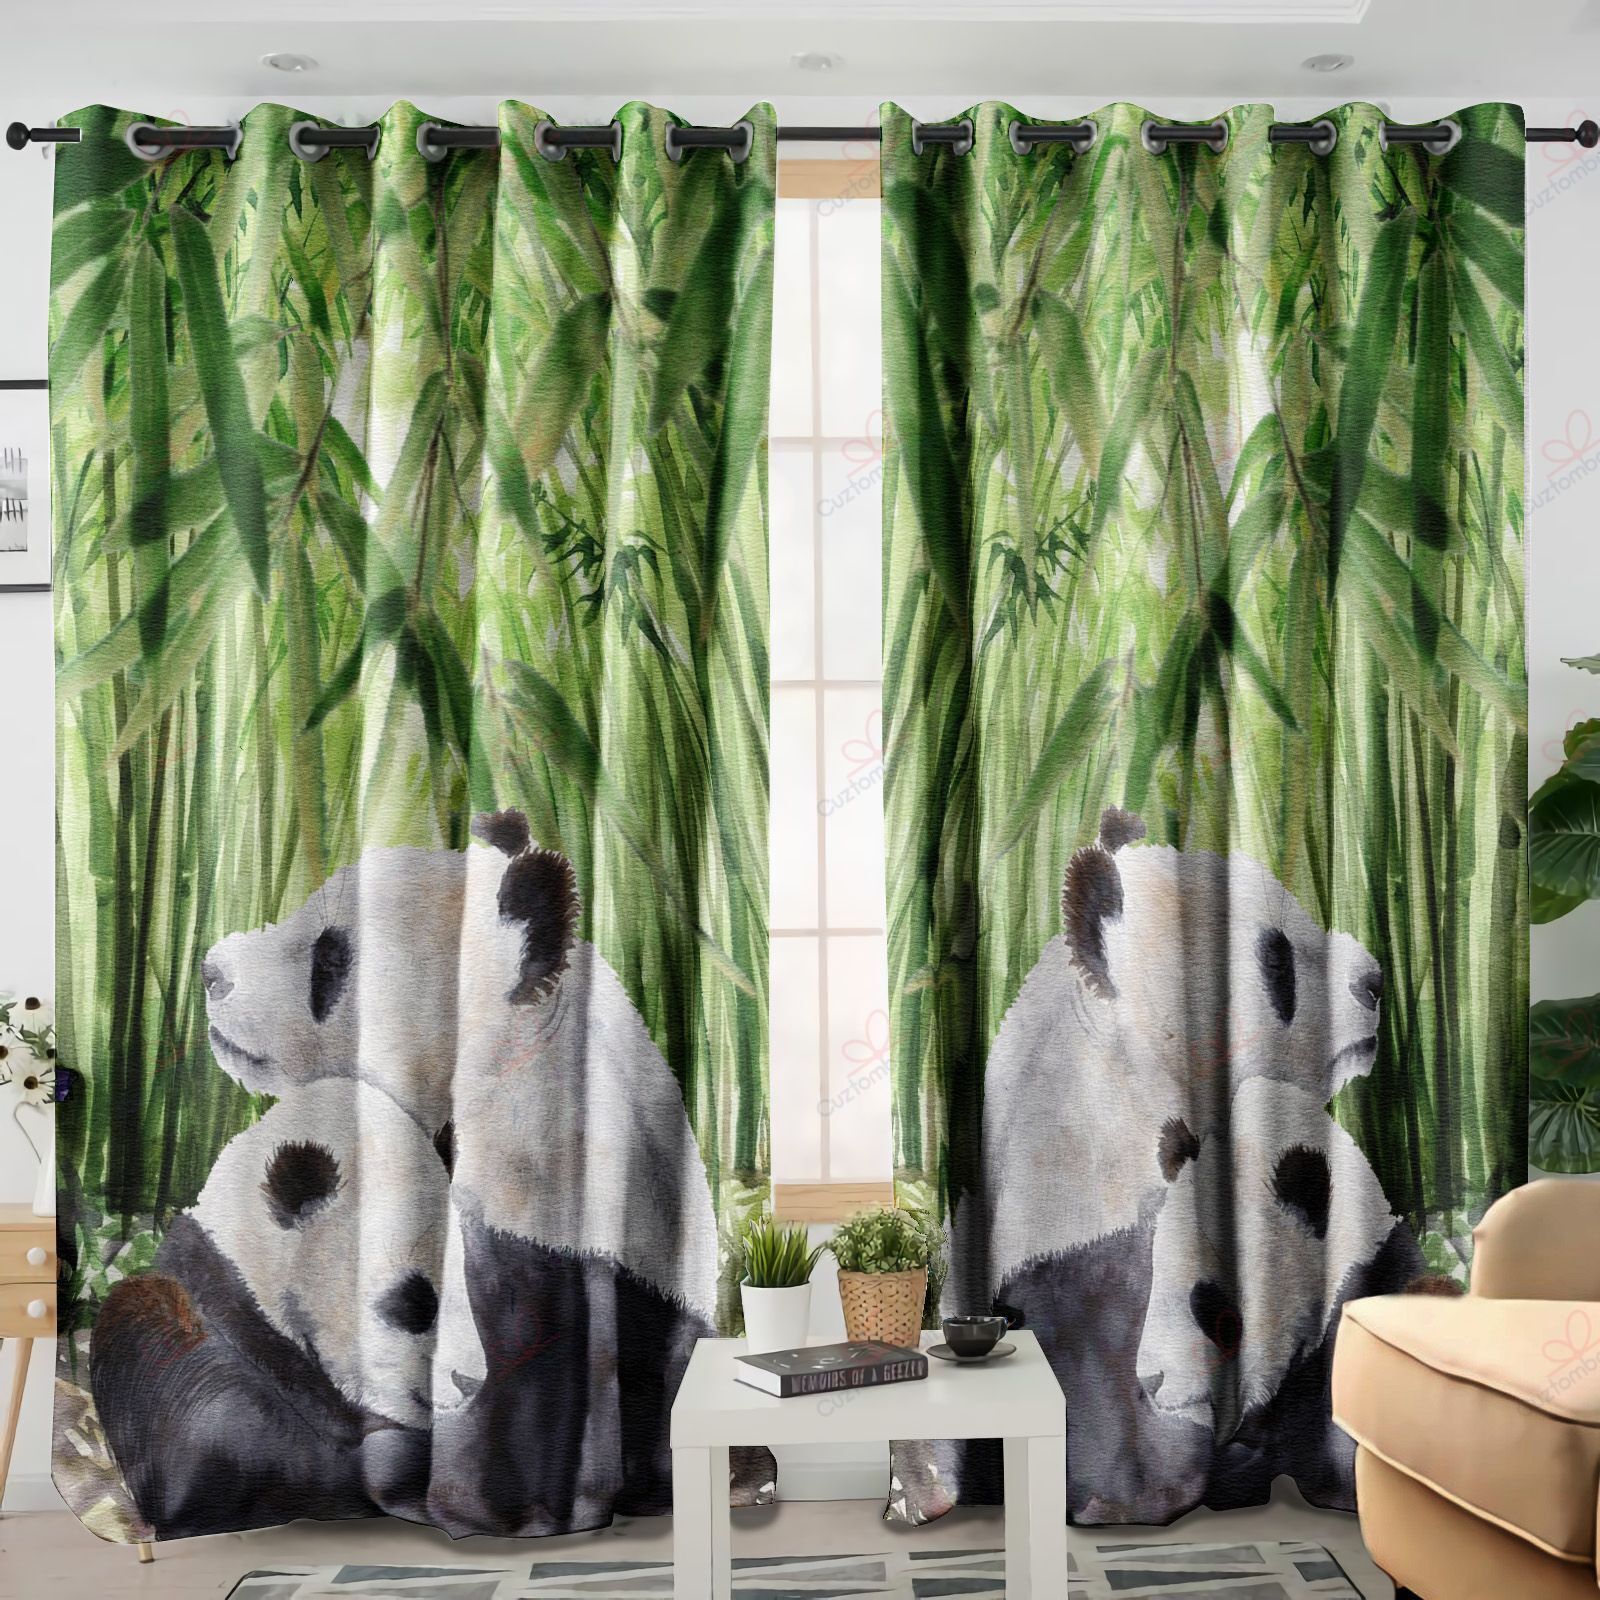 Panda In Bamboo Trees Printed Window Curtains Home Decor